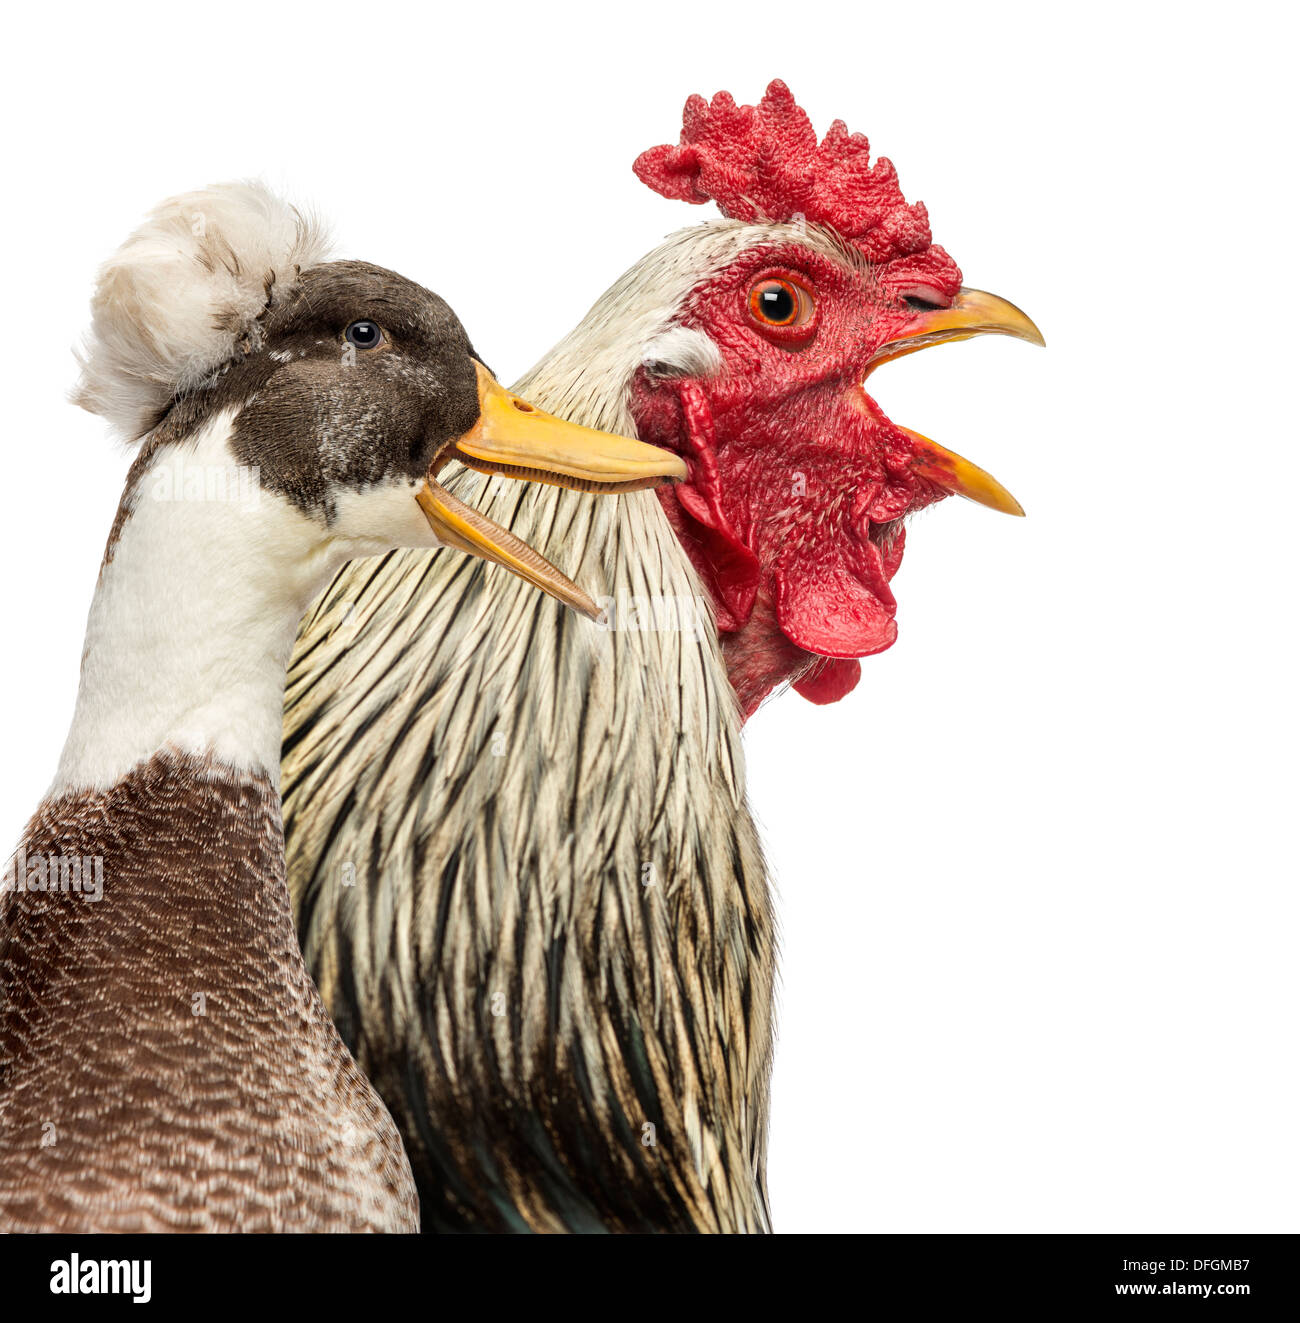 Close-up of a Brahama rooster and a Crested duck quacking in front of white background Stock Photo